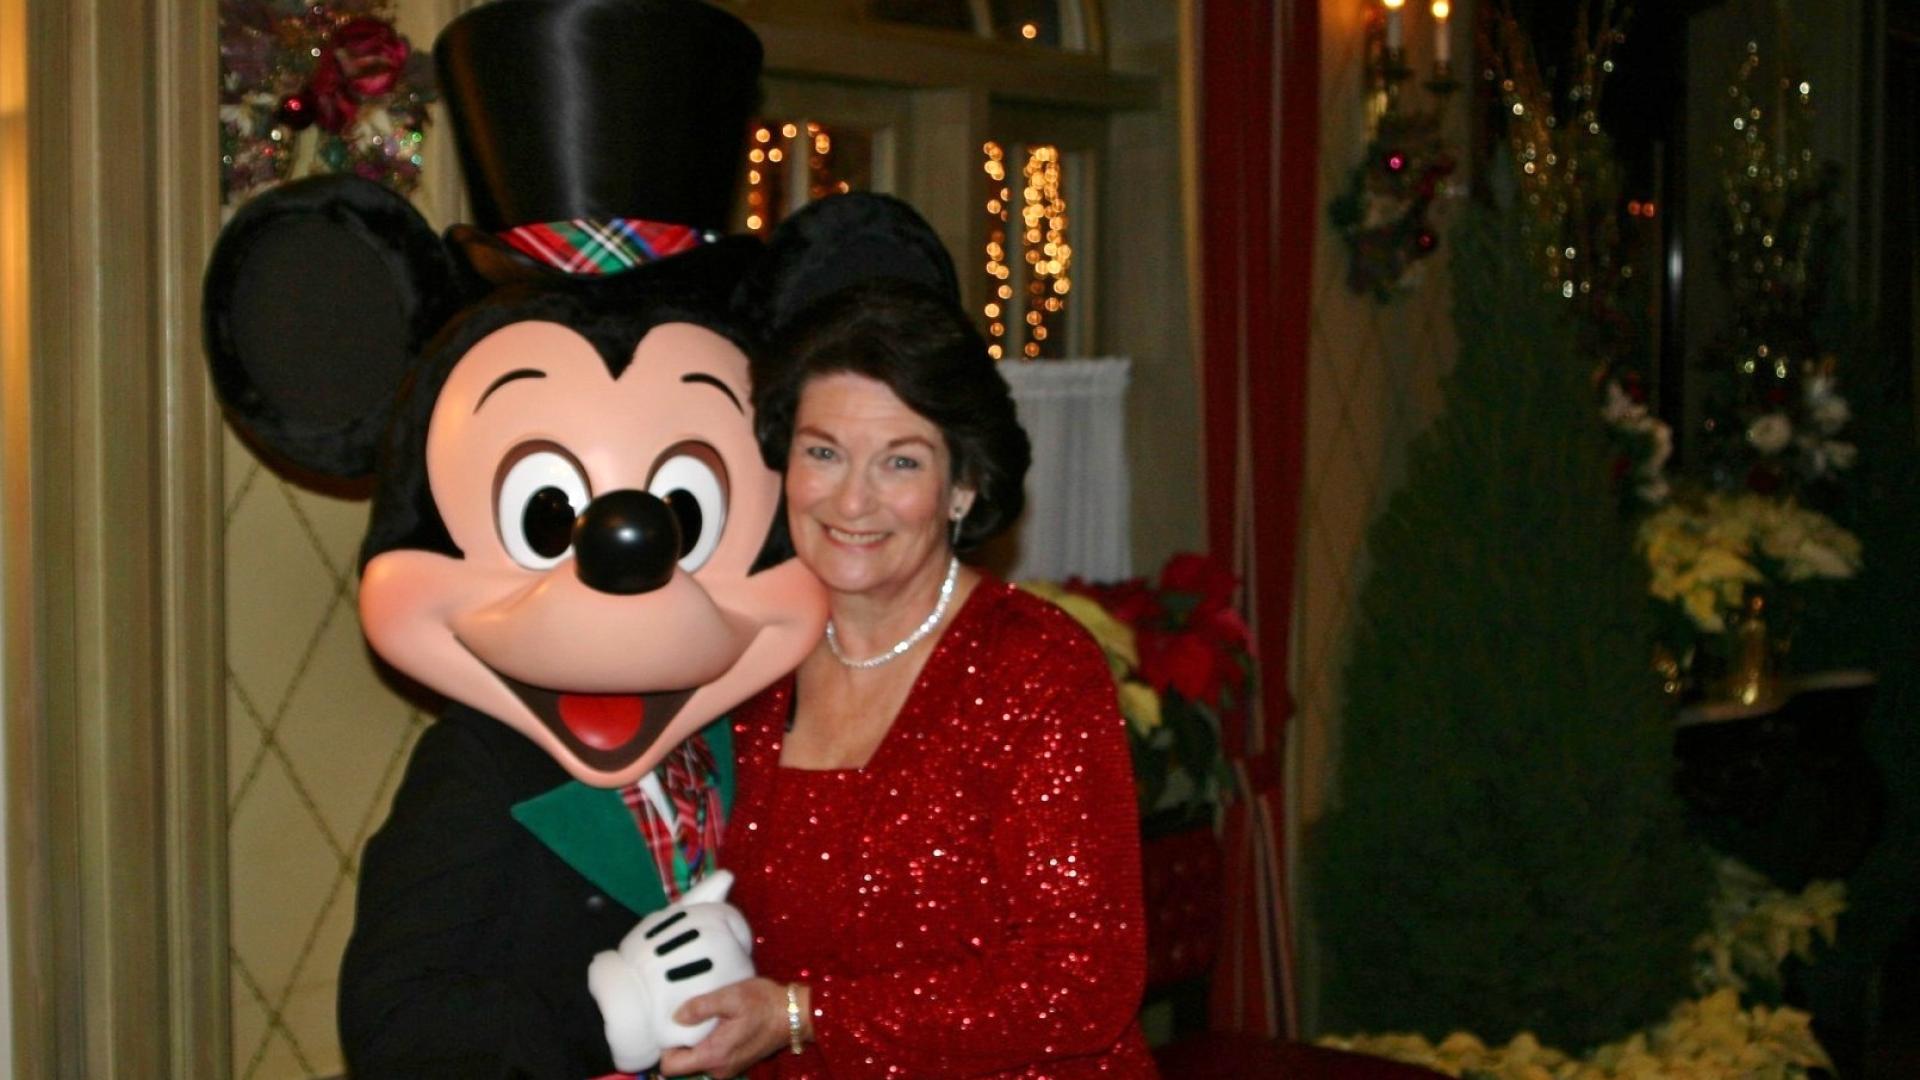 Julie greeted by Mickey